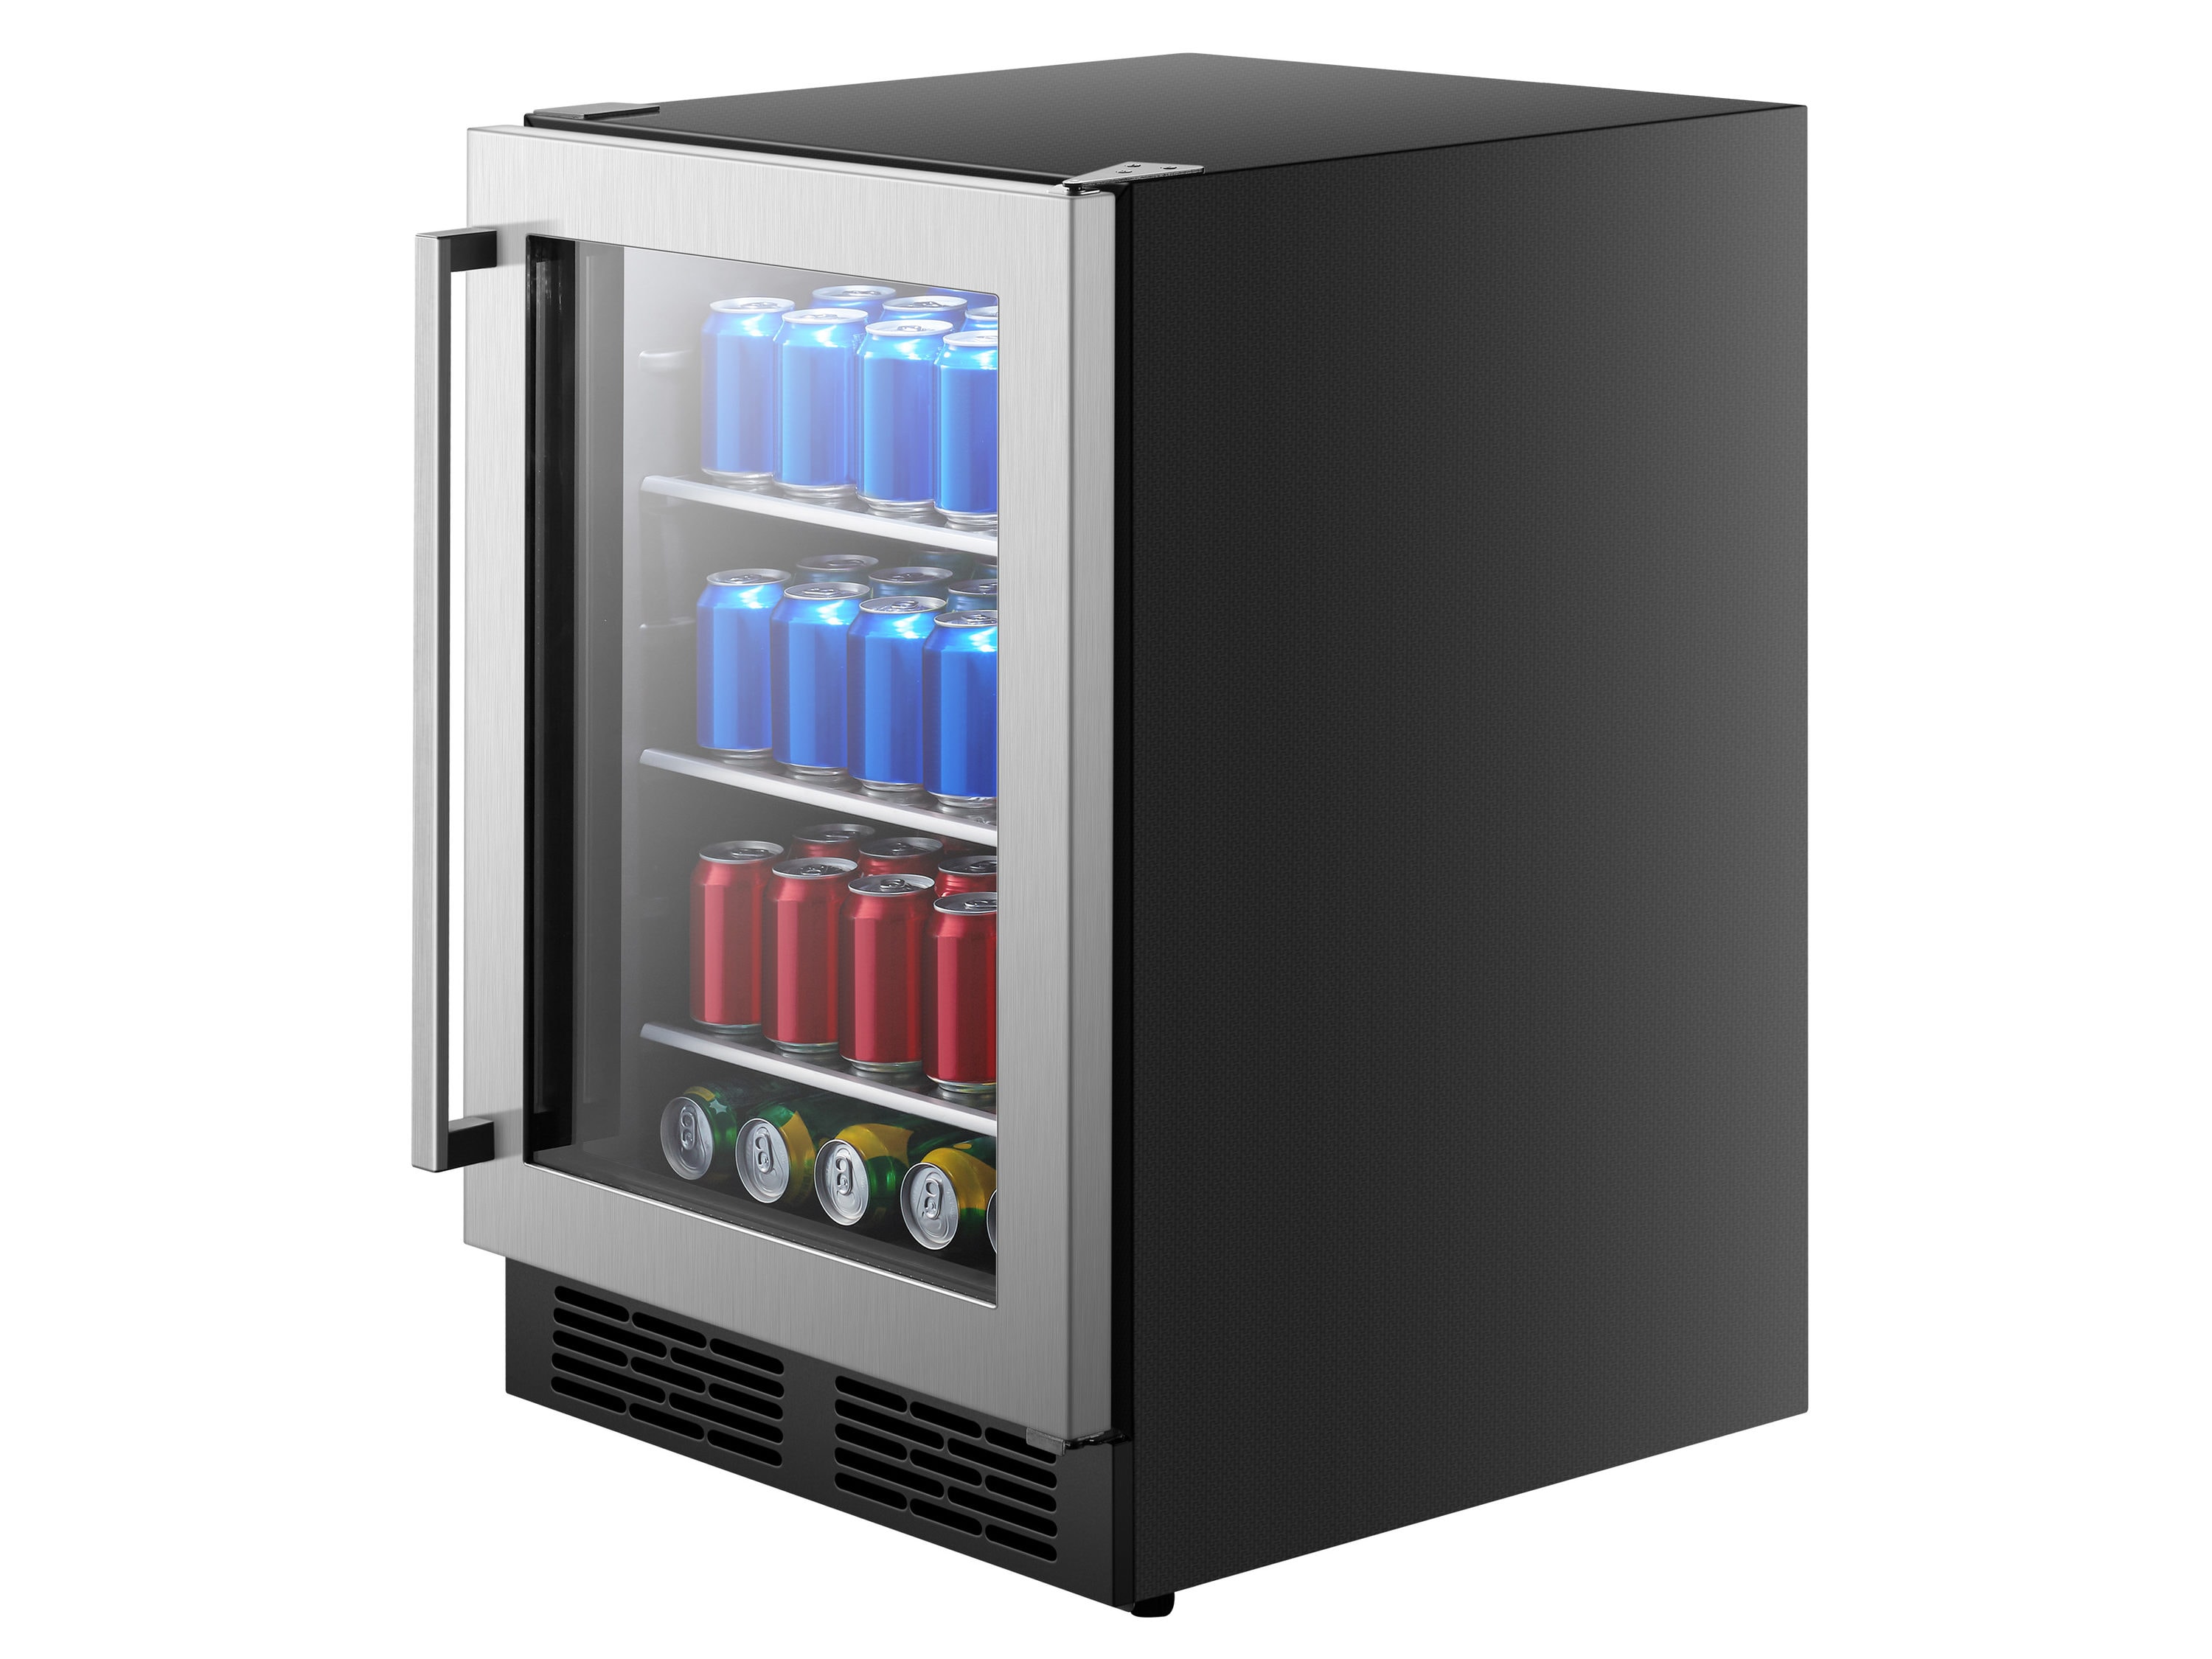  Advanics 20 Inch Wide Built in Beverage Refrigerator with Clear  Glass Front Door, 120 Can Under Counter Cabinet Soda Beer Drink Cooler  Center Large, Undercounter Bar Display Fridge for Man Cave